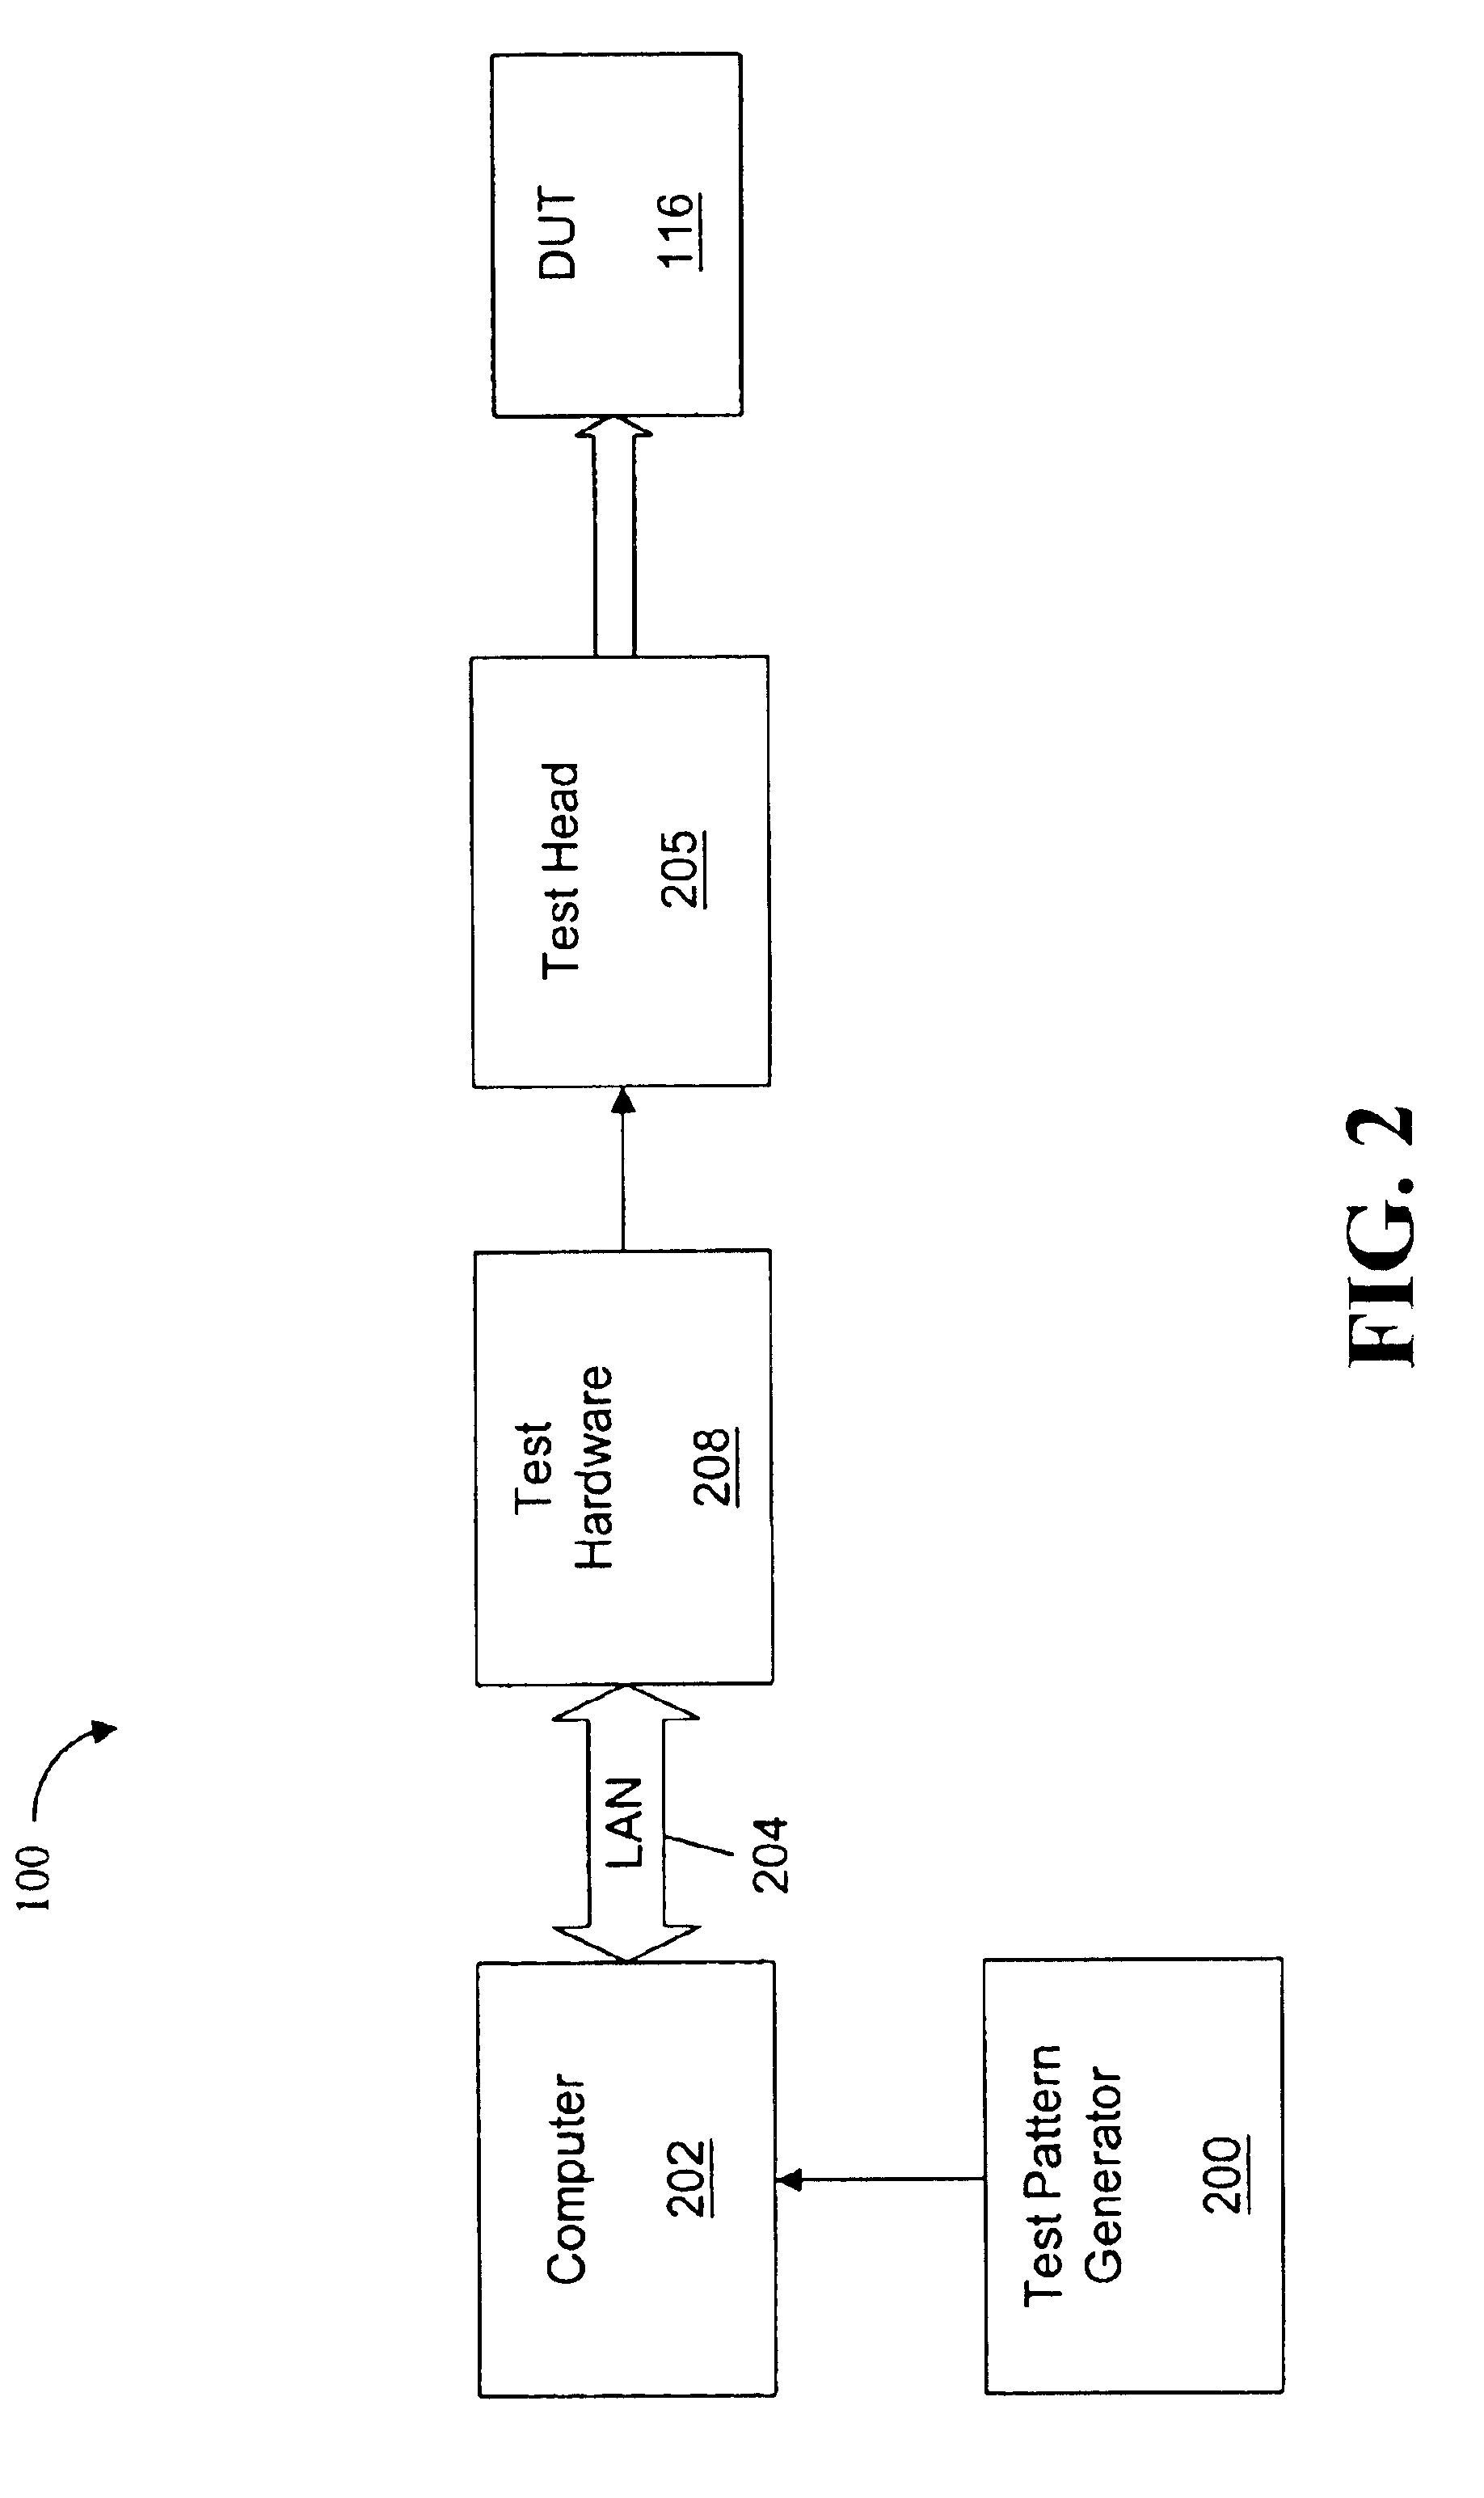 Apparatus and method for generating a set of test vectors using nonrandom filling